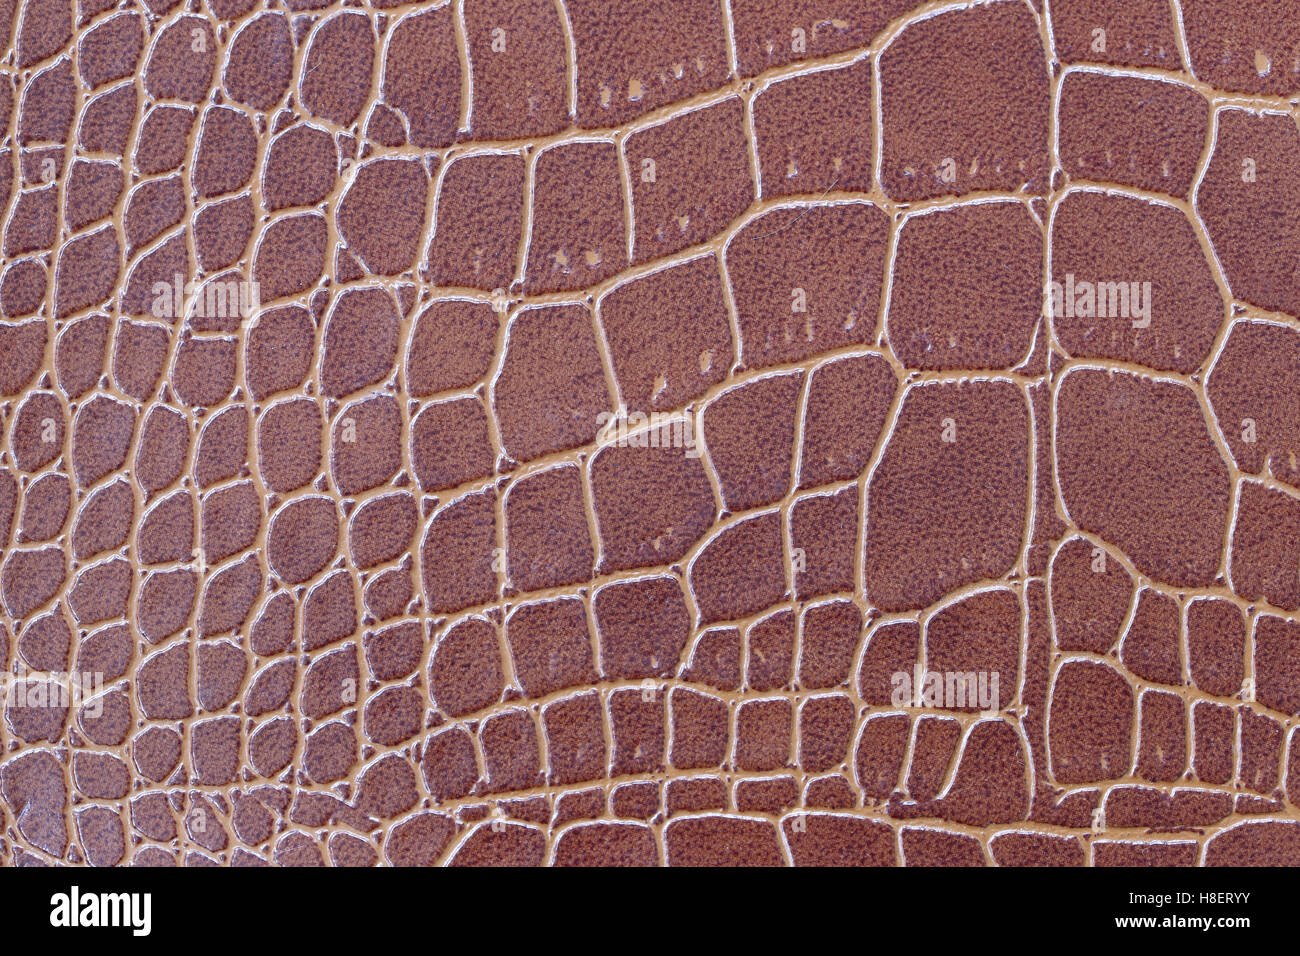 Brown crocodile patterned artificial leather for the background design. Stock Photo